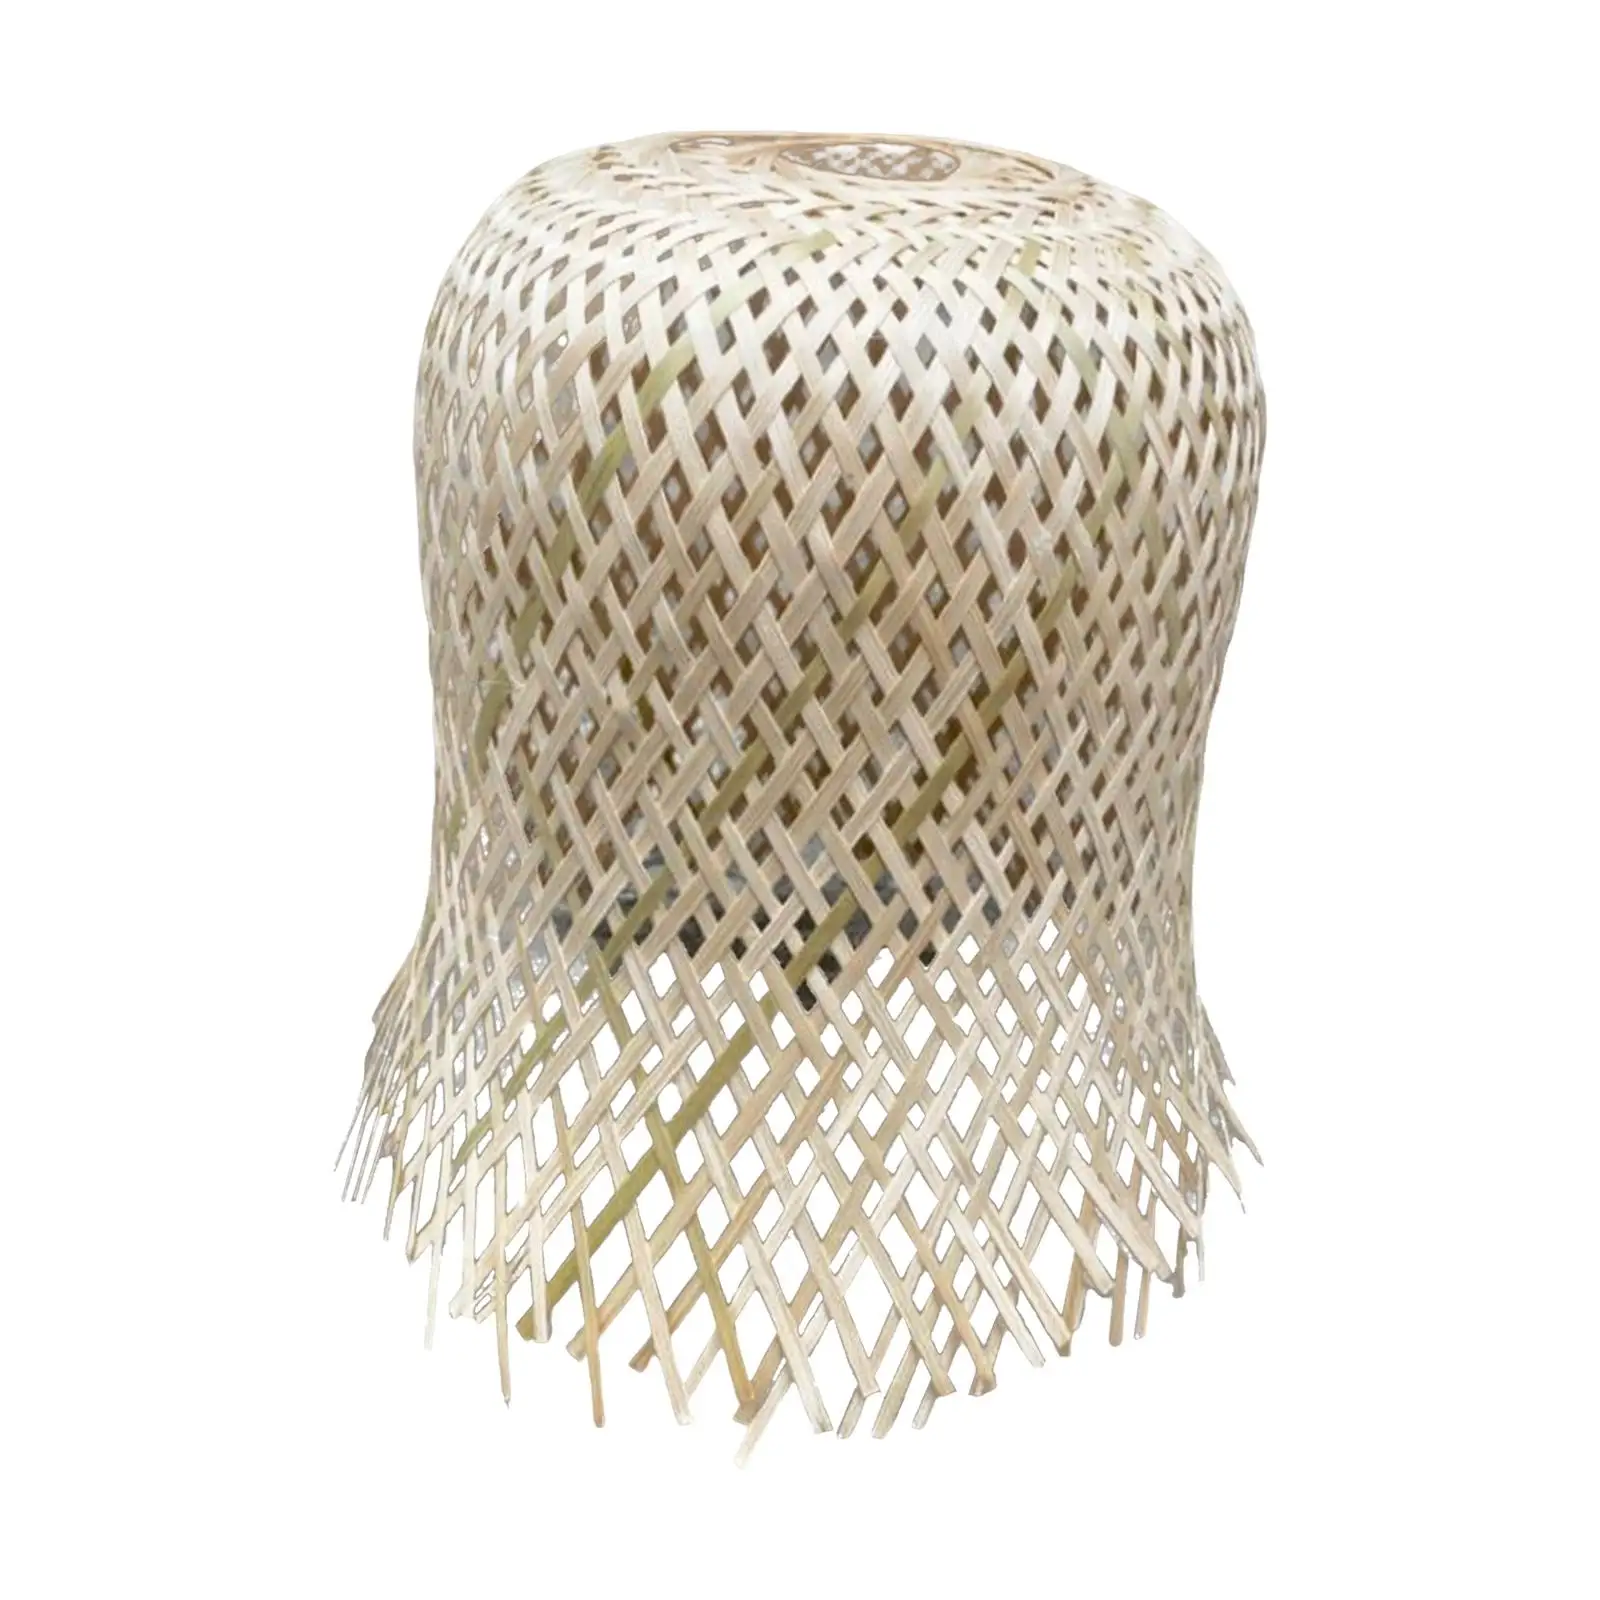 Pendant Light Cover Ceiling Light Fixture Hanging Decorative Handwoven Bamboo Lamp Shade for LED Lights Bedroom Dining Room Dorm